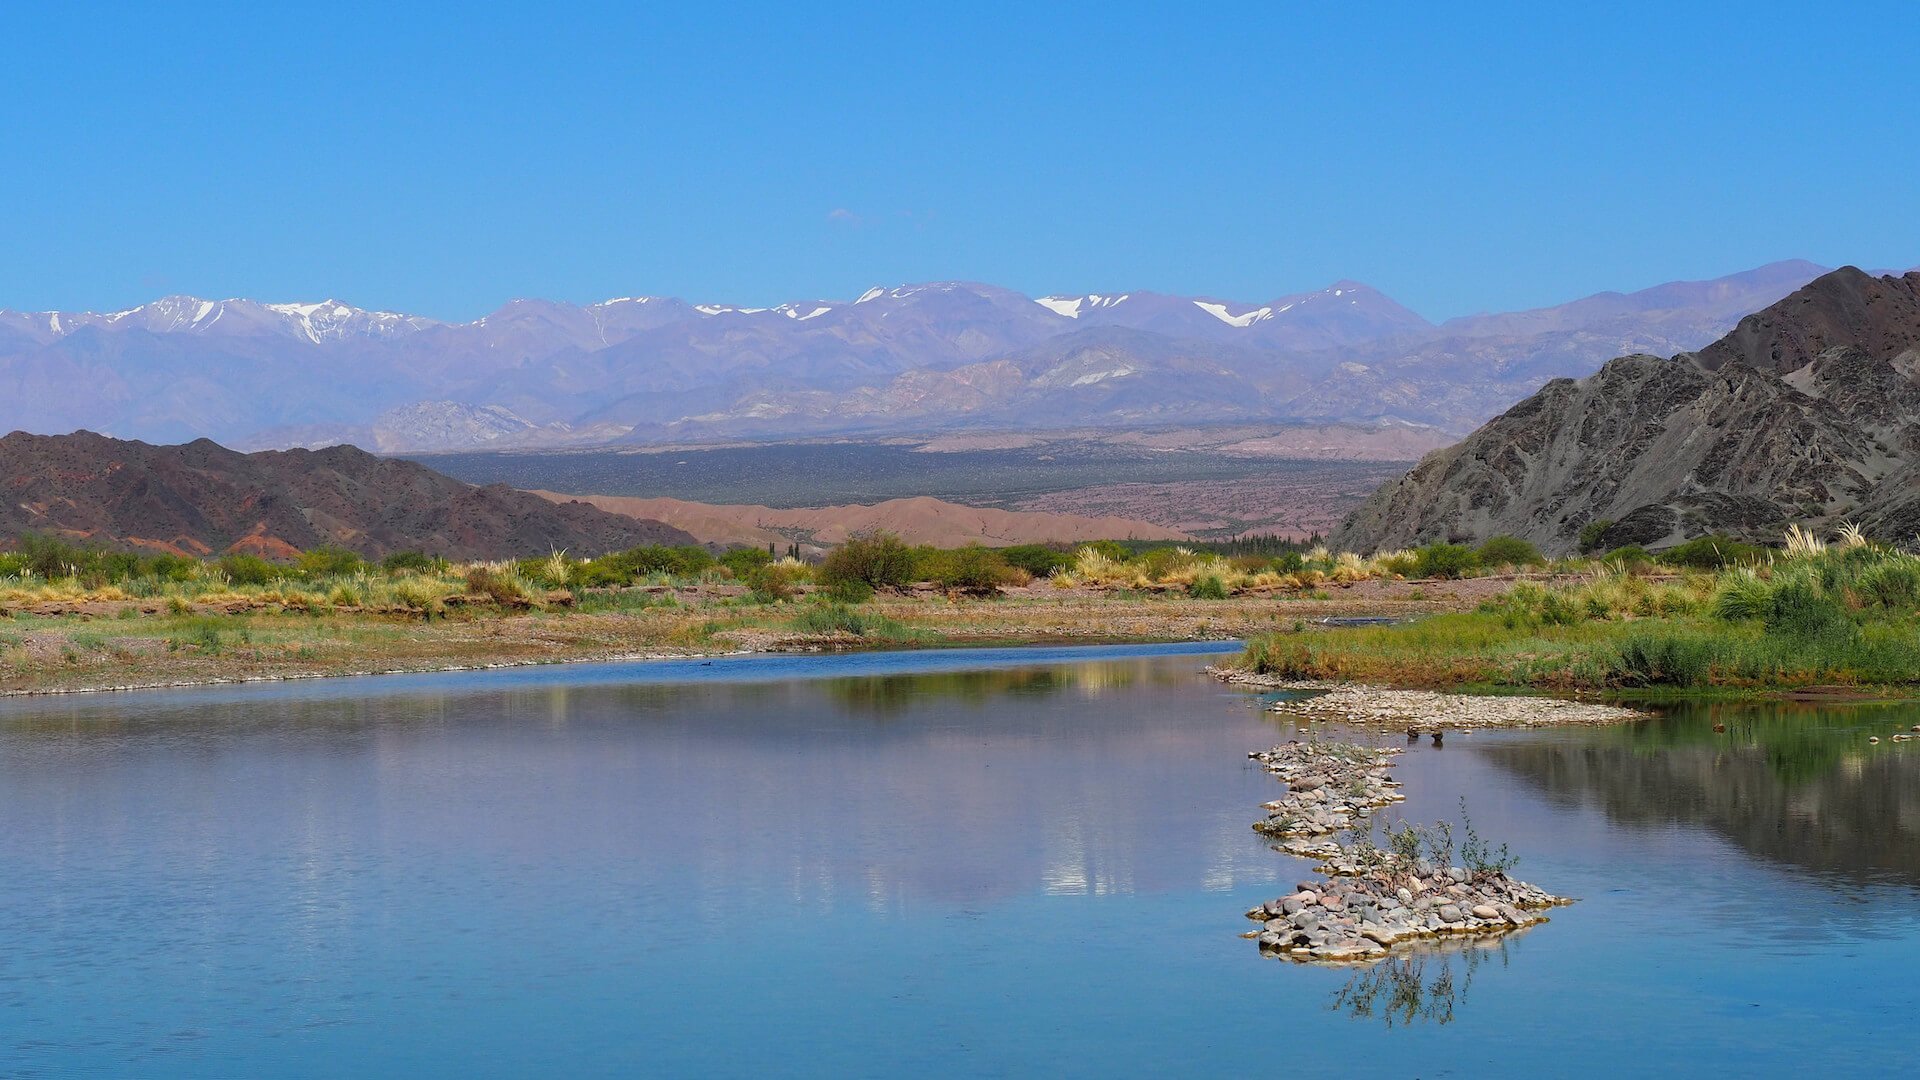 A blue lake with an island of stones and mountains in the background